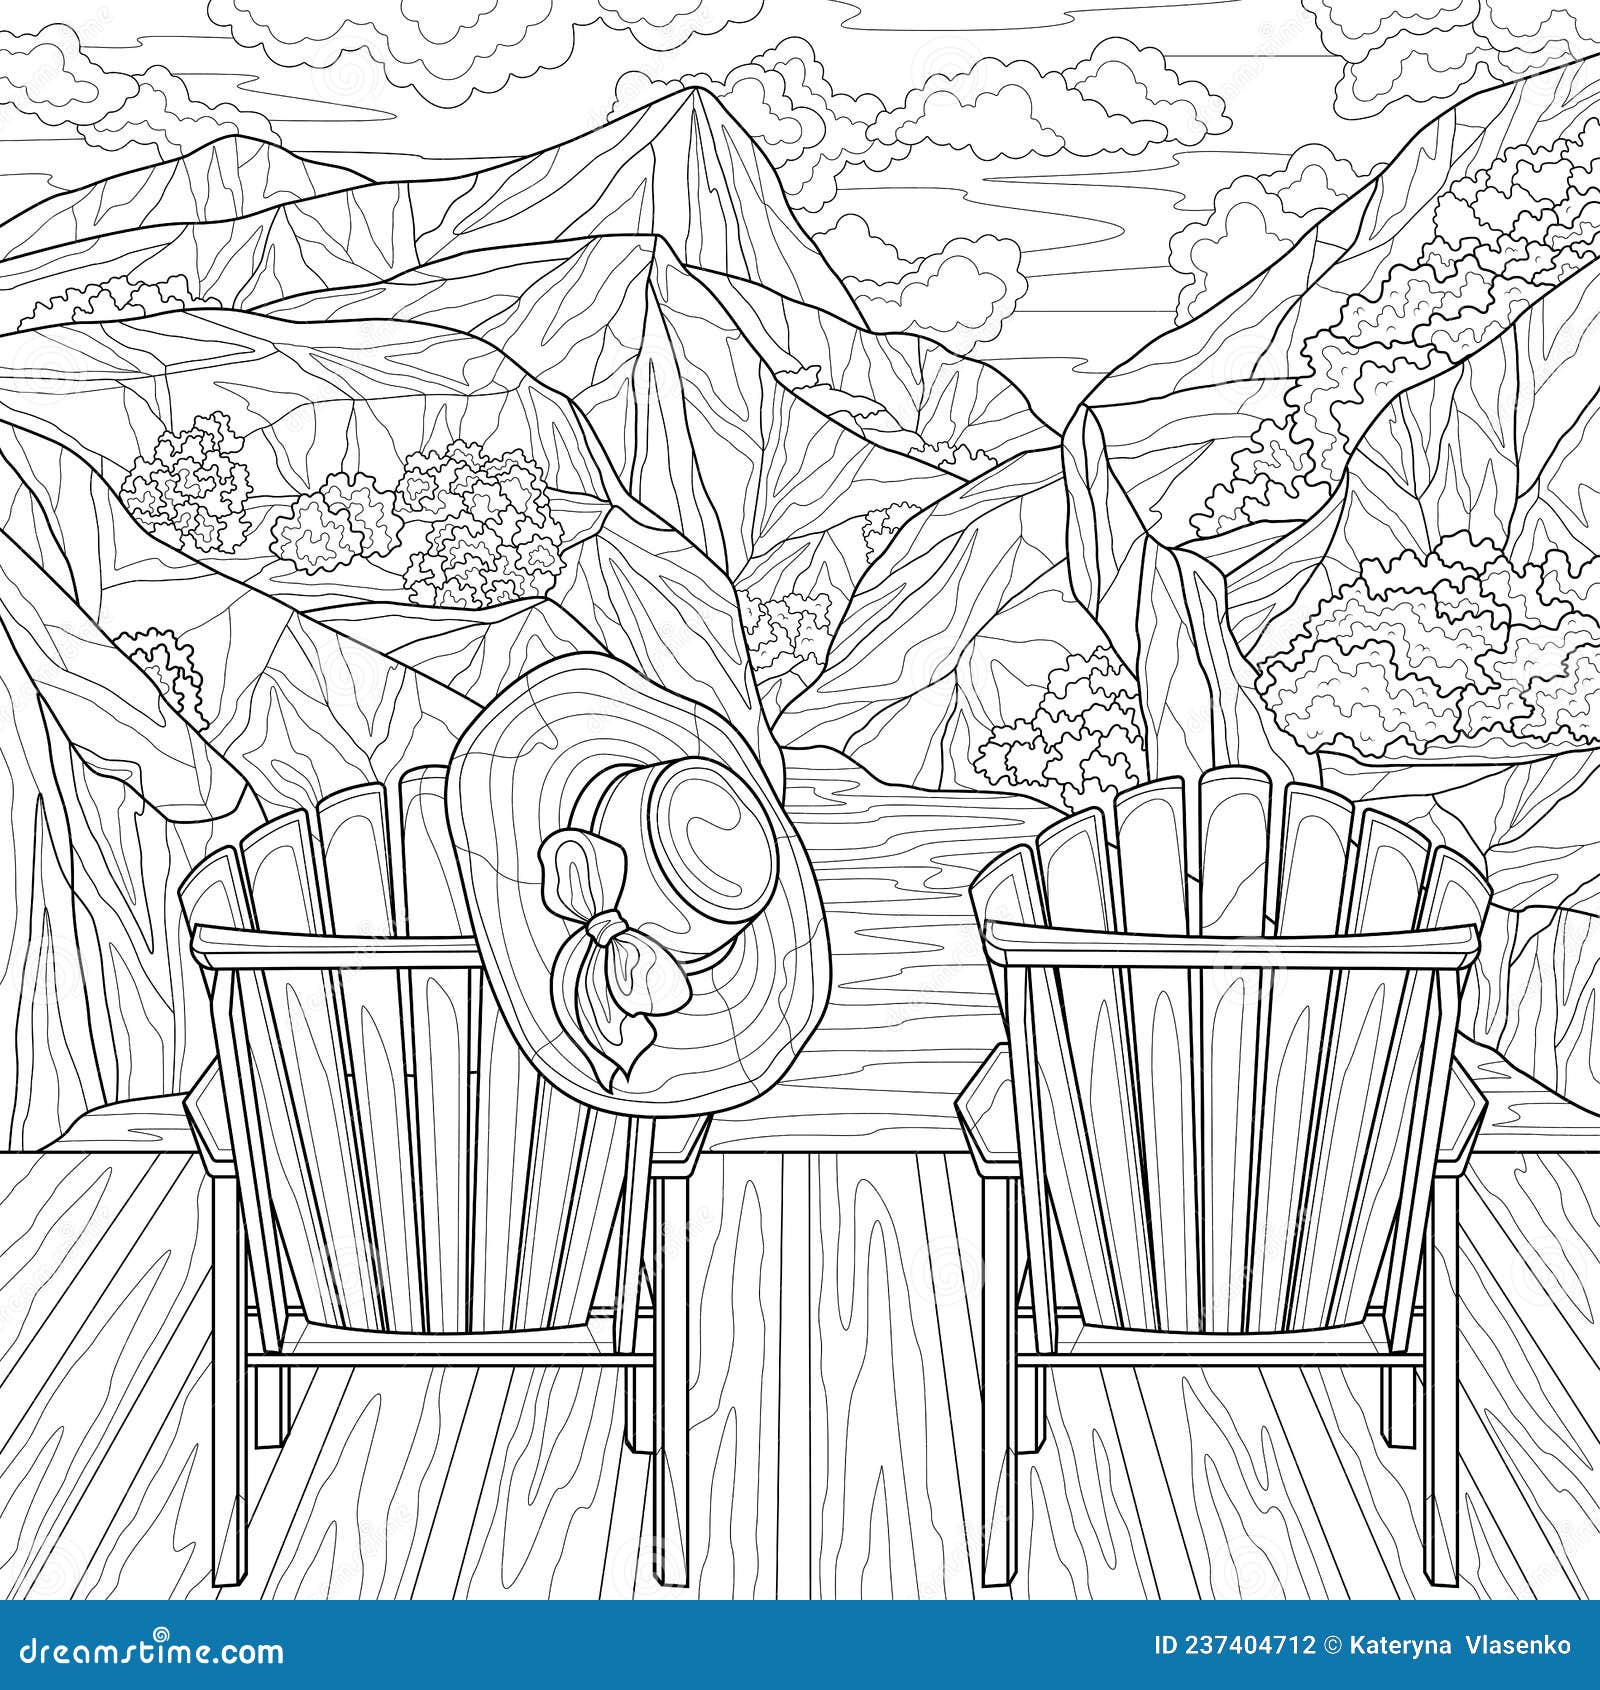 Two chairs and mountains scenerycoloring book antistress for children and adults stock vector